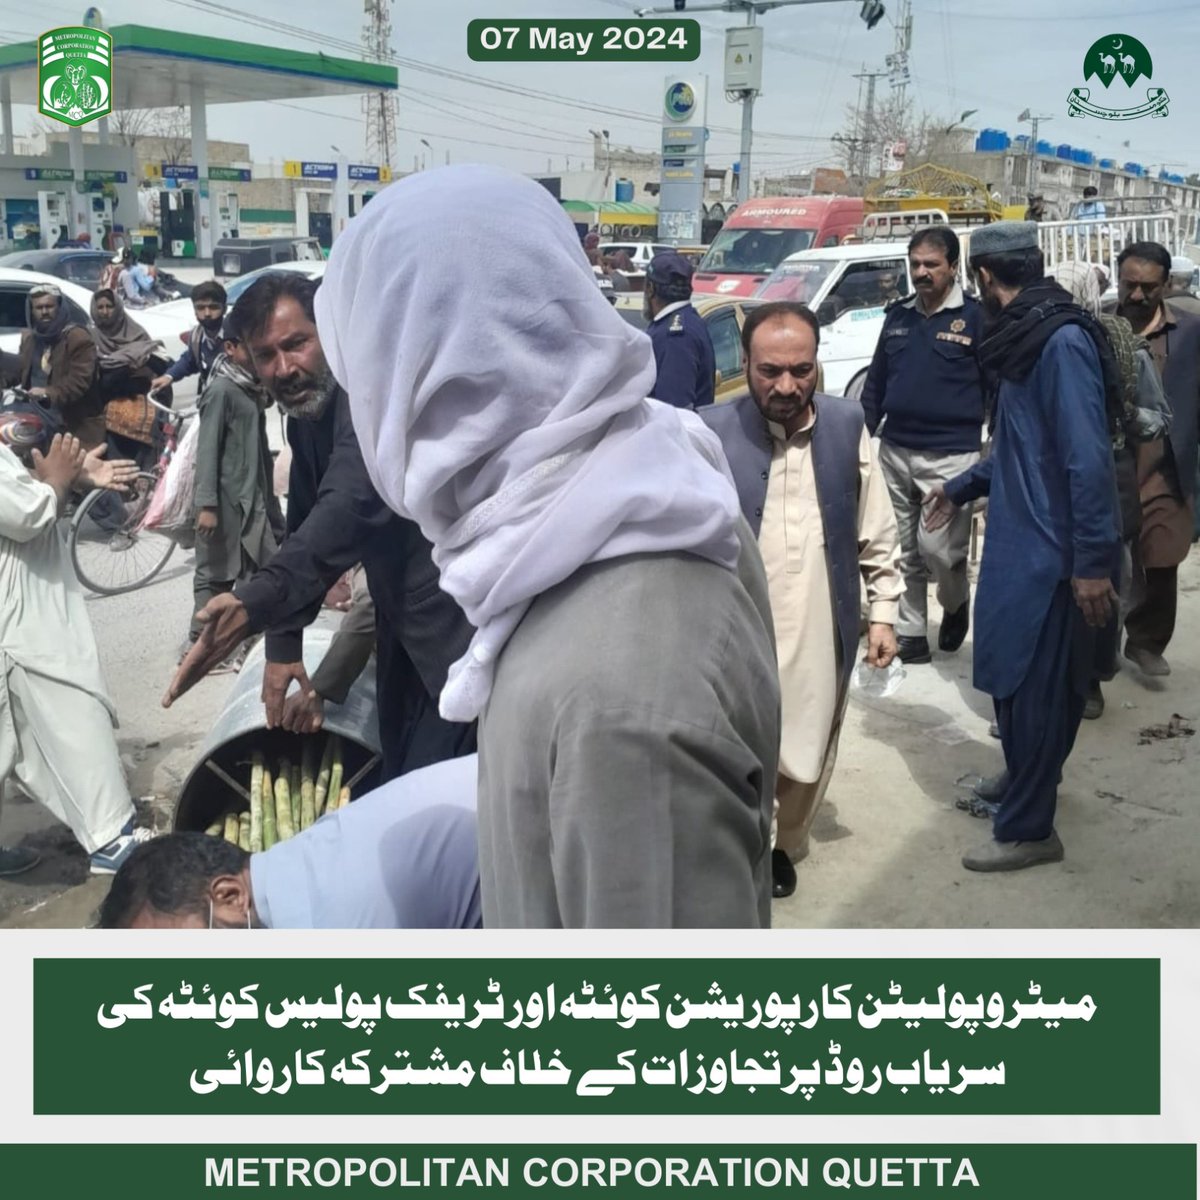 Joint operation by Quetta Metropolitan Corporation & #Quetta Traffic Police against encroachments on Siryab Road as per Commissioner/Administrator @hamzashafqaat 's directives. Cleared road obstacles, warned against encroachment, & urged cooperation to avoid further disruptions.